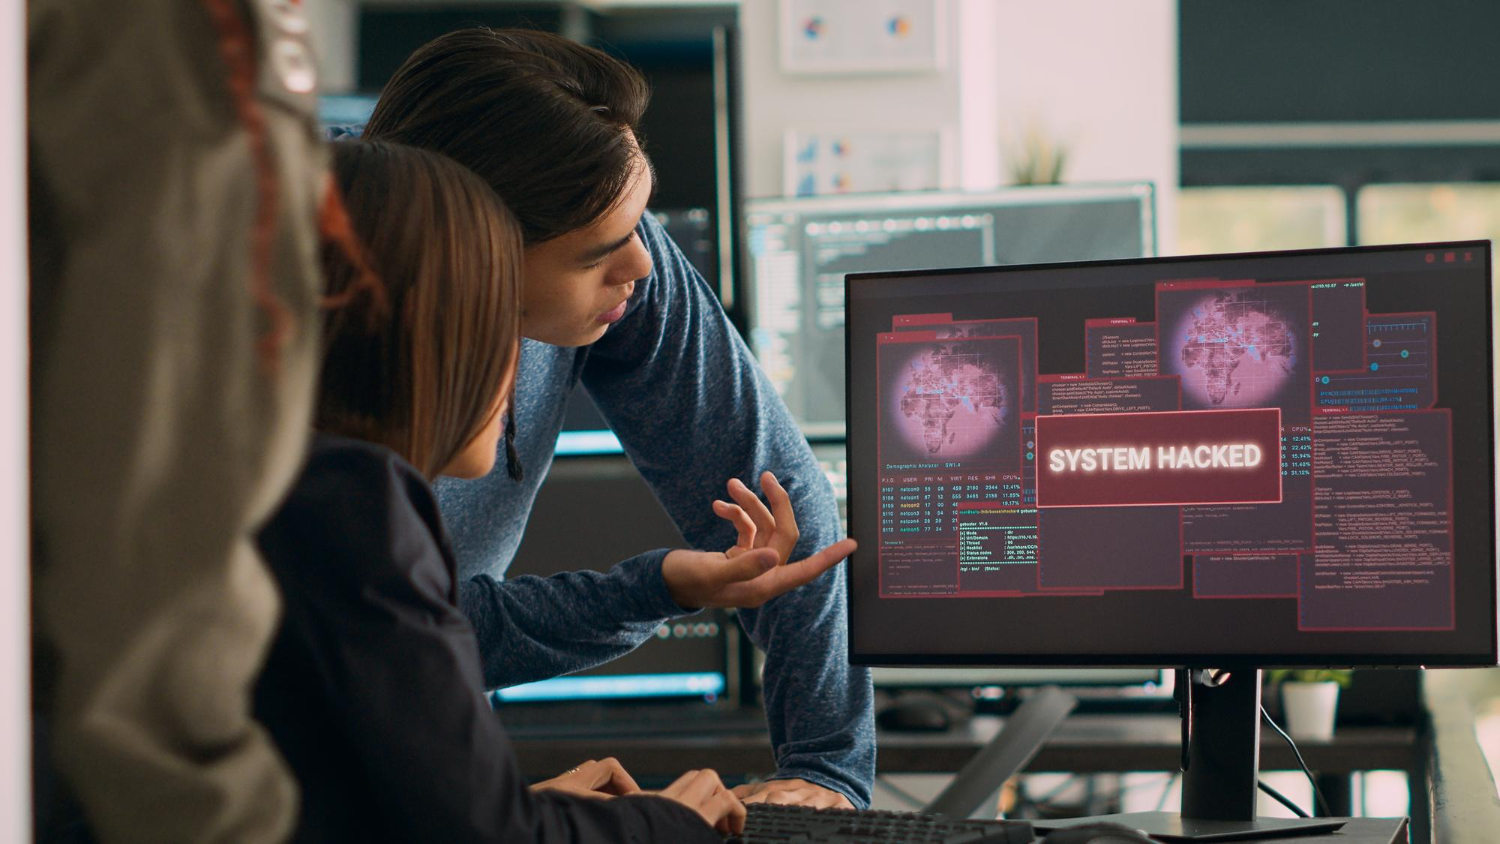 The image shows Two individuals observing a computer screen displaying a virus, indicating a system hack. 